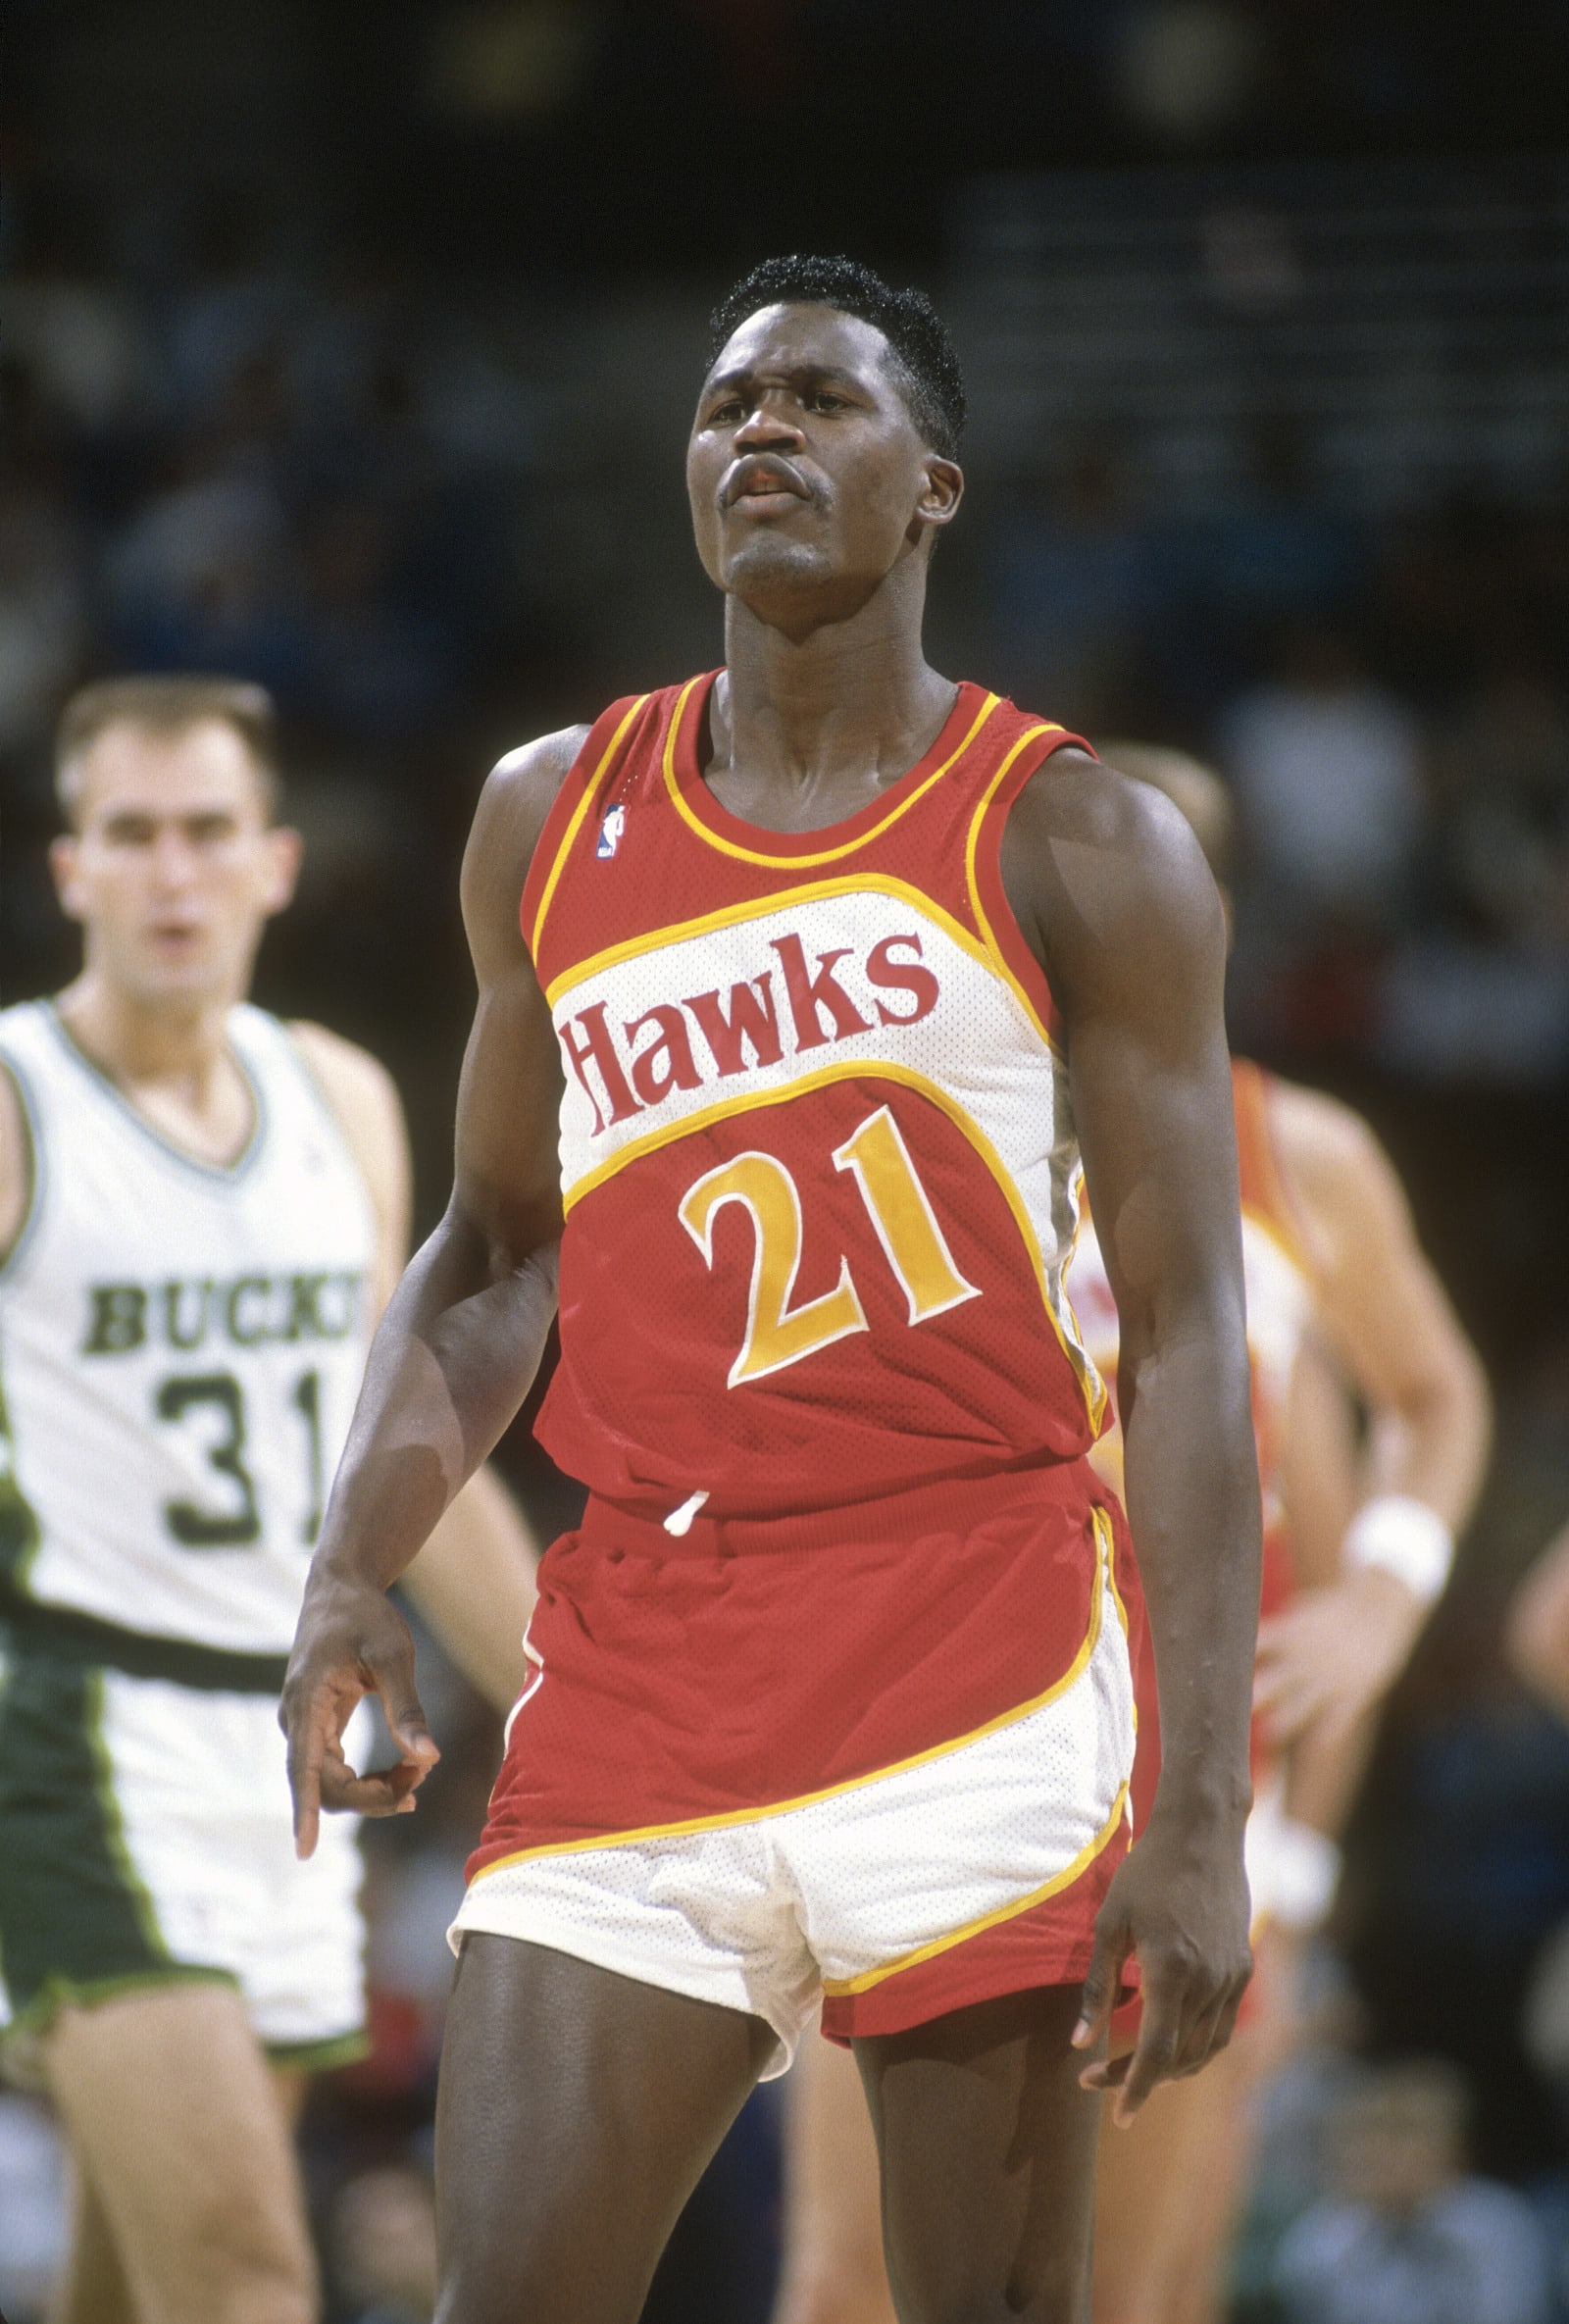 Ranking the Best and Worst Uniforms in Atlanta Hawks History